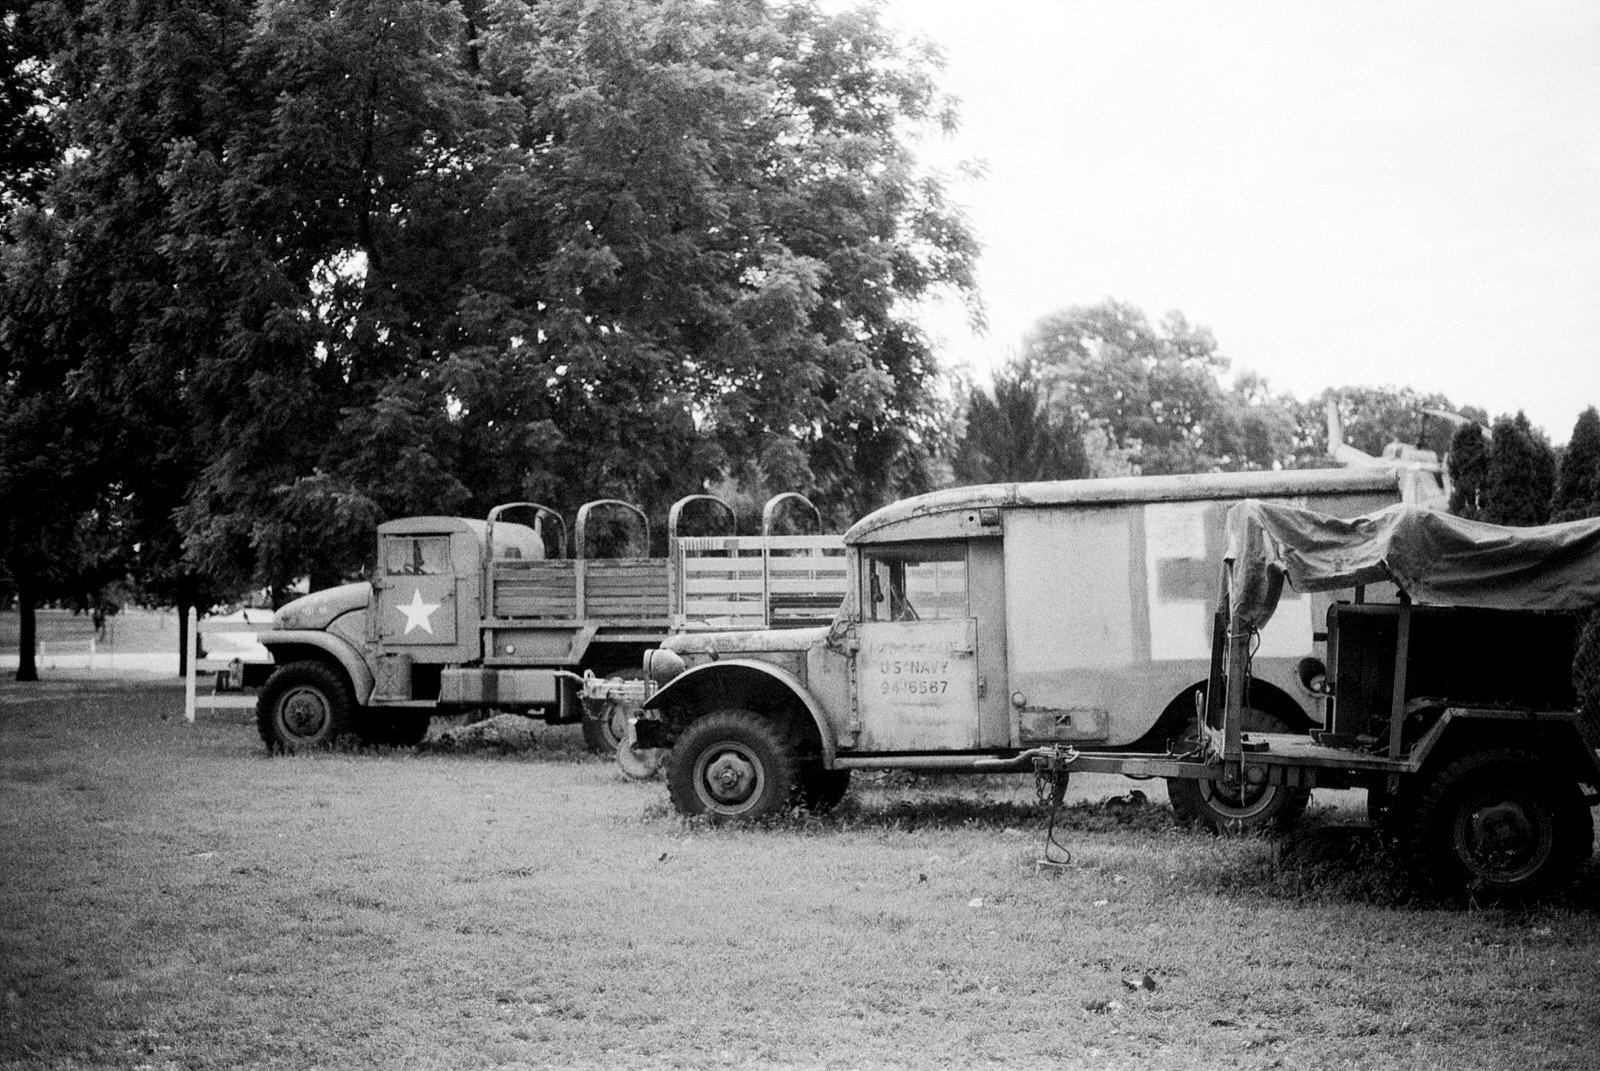 The old military vehicles sitting there, with so much history attached to them.